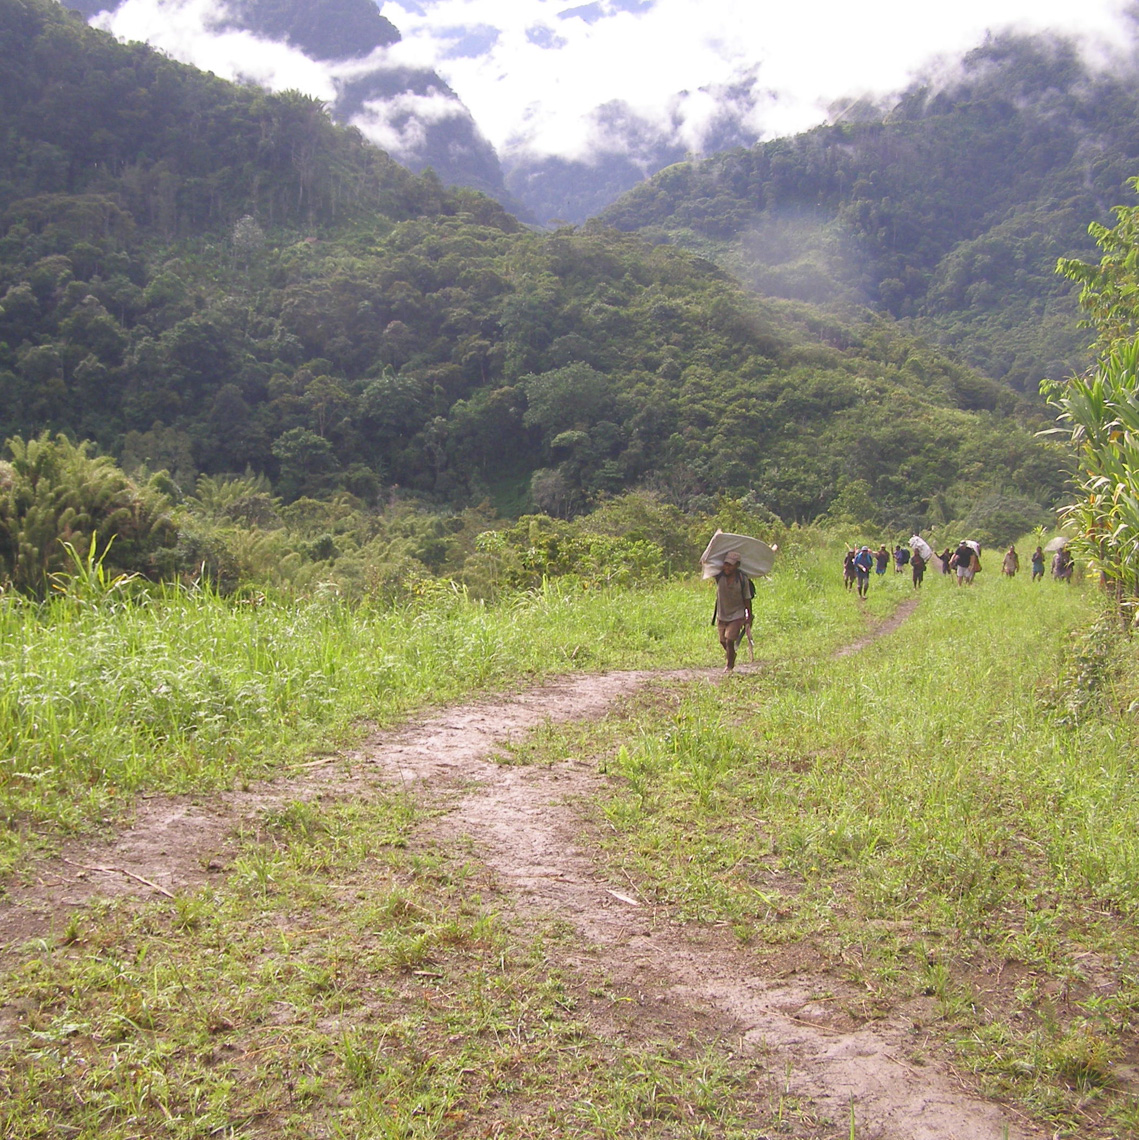 Entering a New Guinea Village, Morobe Province.